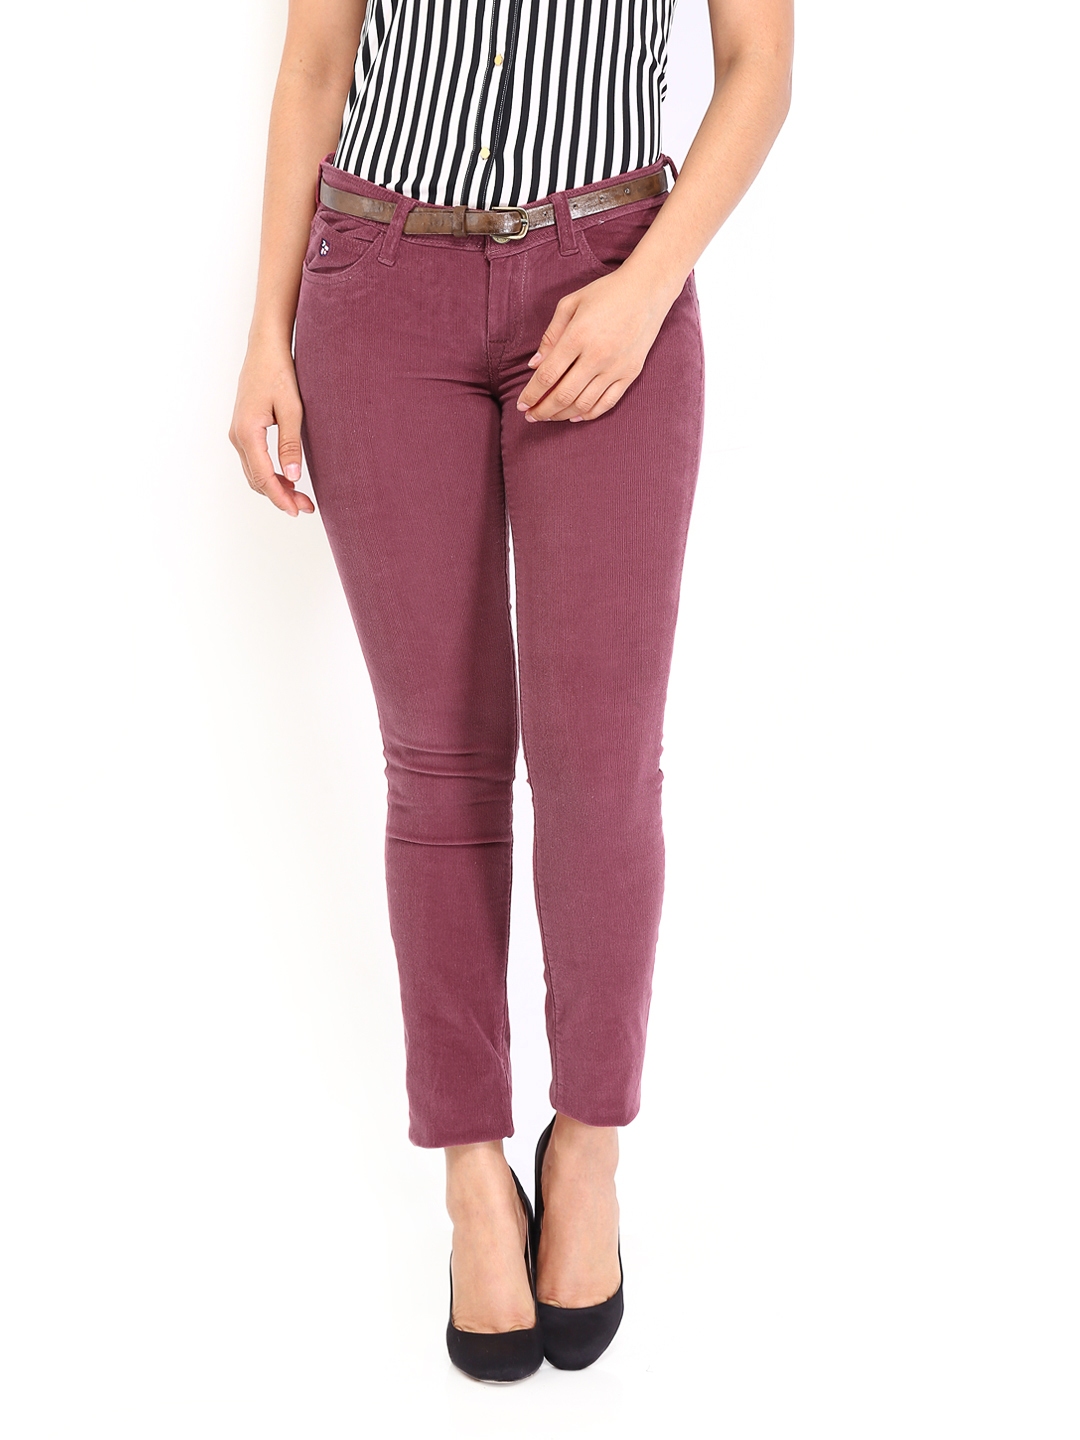 Buy US Polo Assn Women Burgundy Super Skinny Fit Corduroy Trousers   Trousers for Women 352149  Myntra